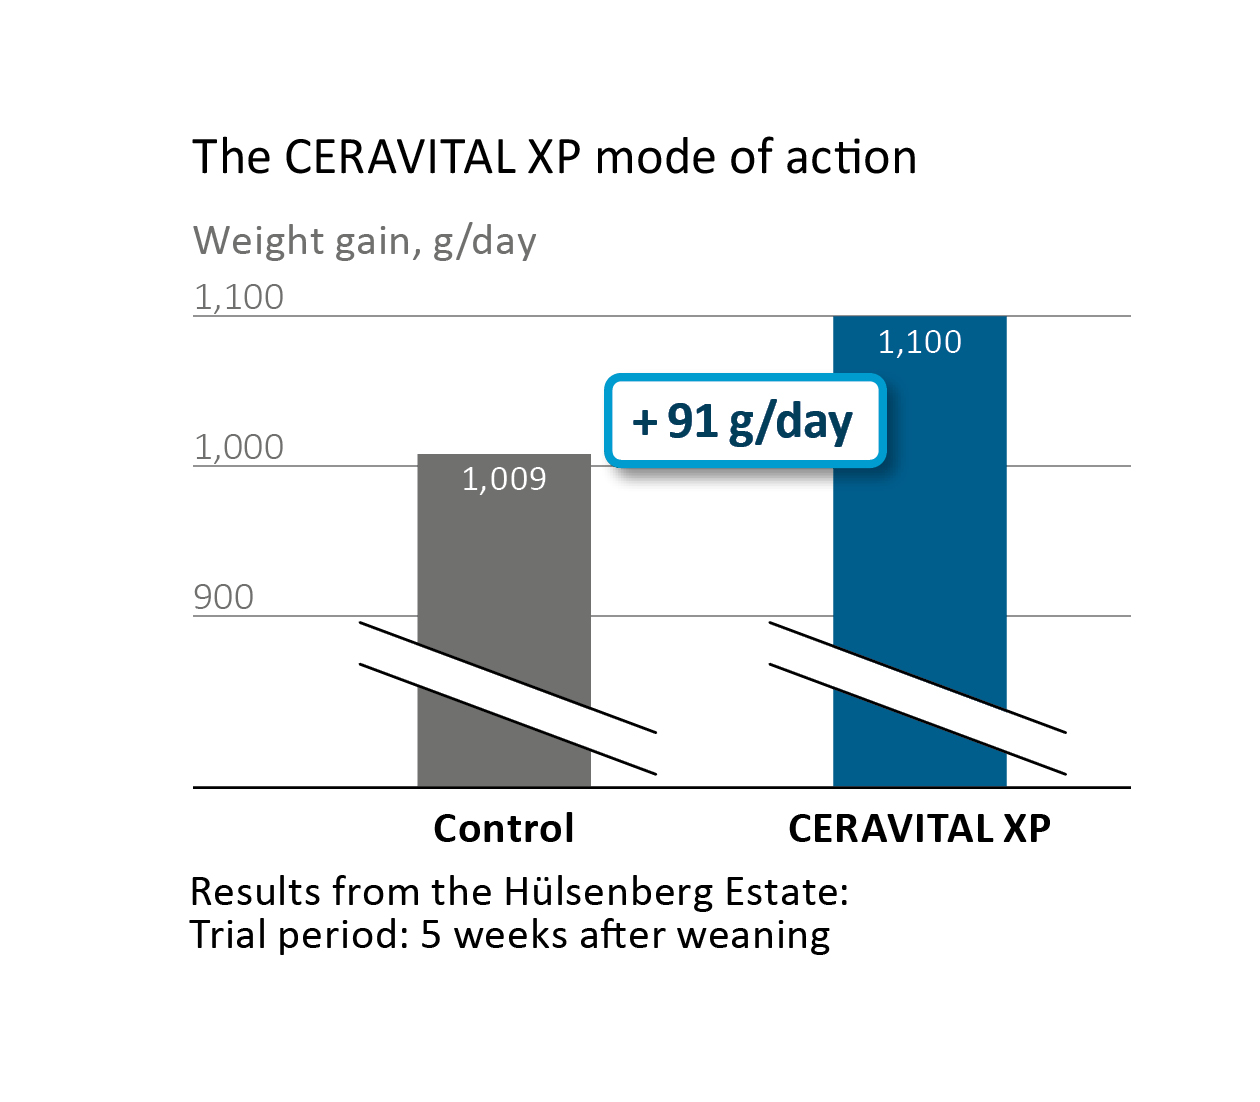 Higher weight gains with CERAVITAL XP